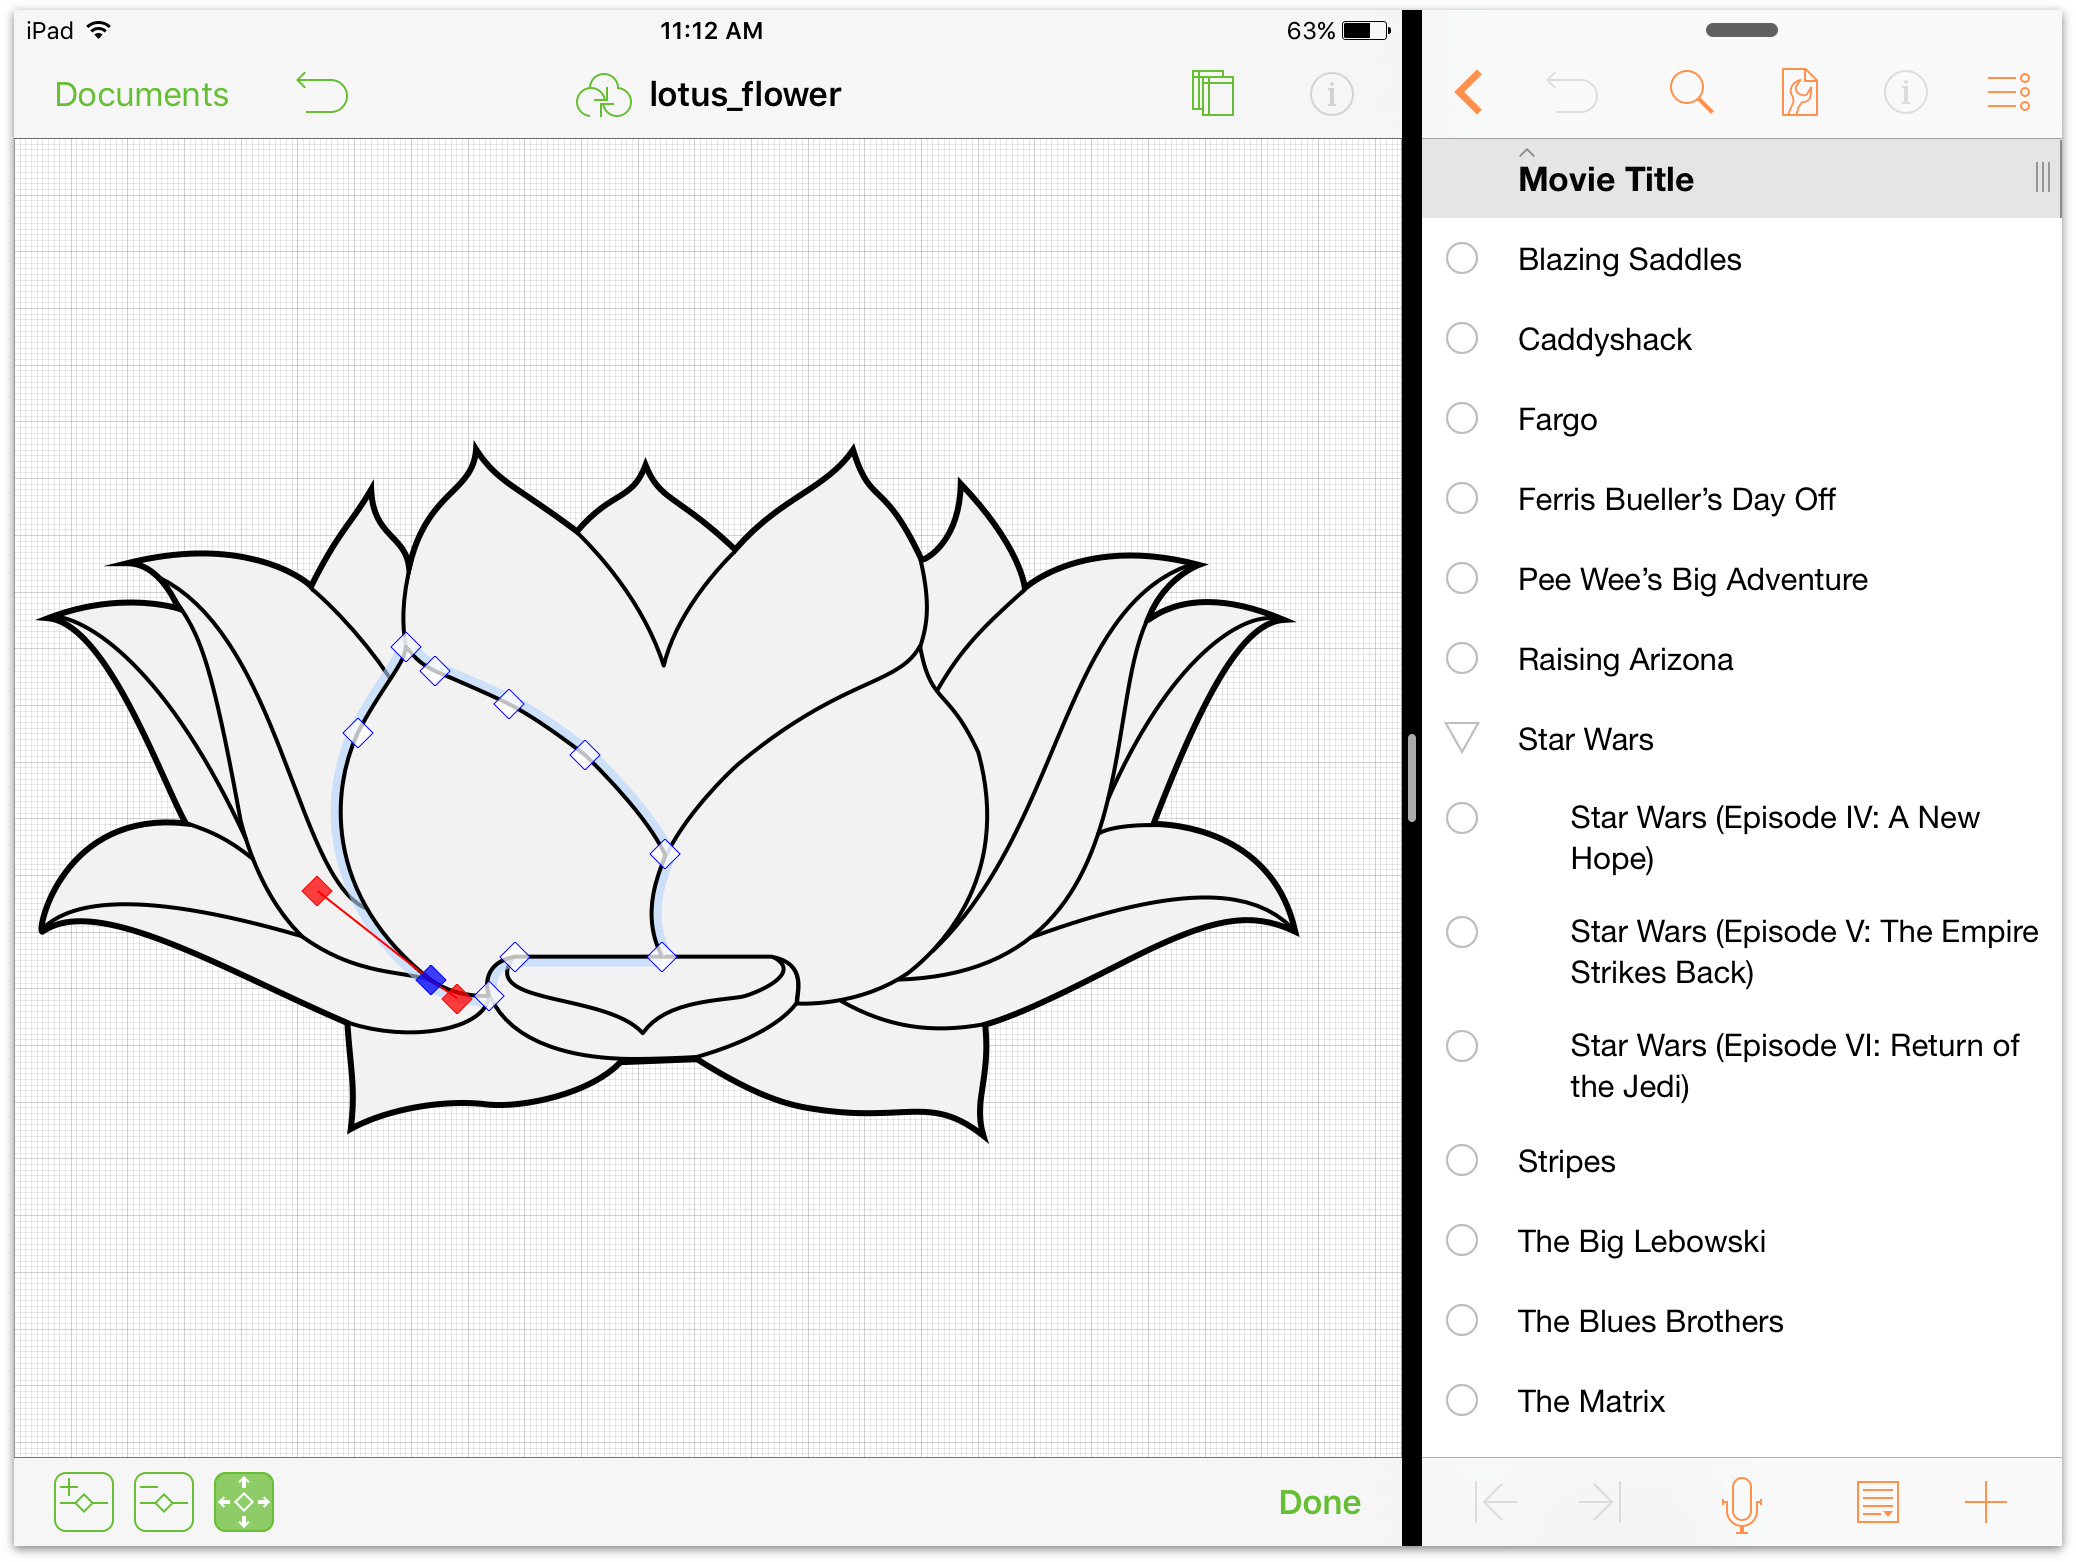 Multitasking in iOS 9, with OmniGraffle on the left and OmniOutliner on the right